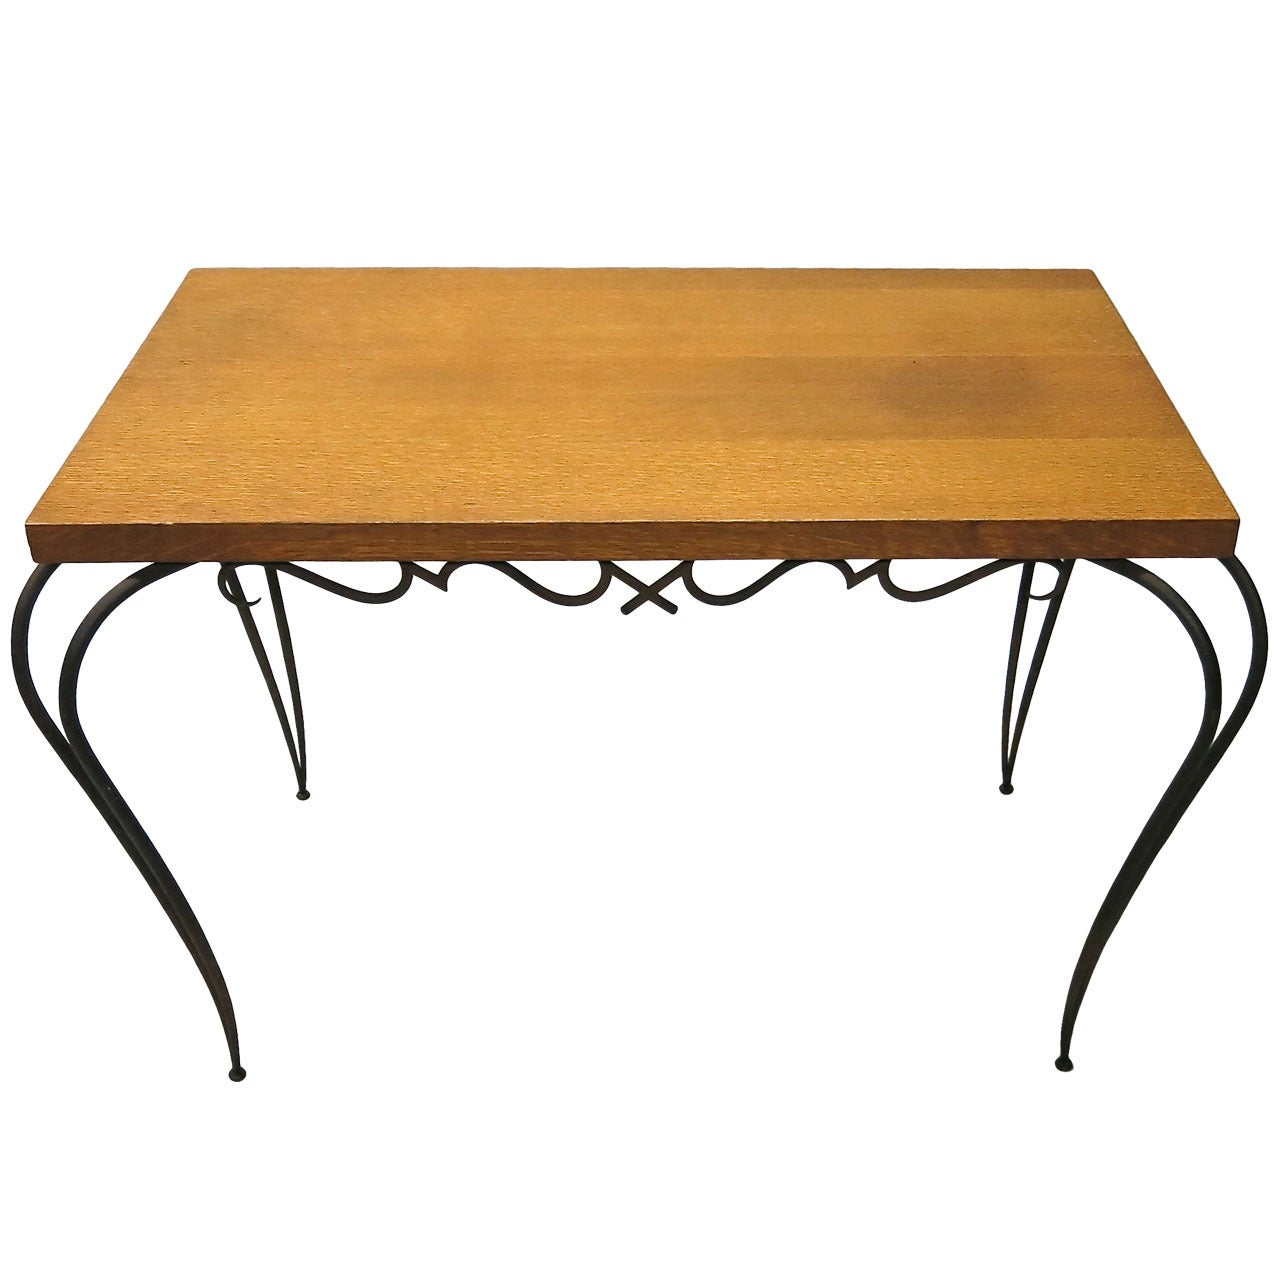 Table by Rene Prou circa 1935 Made in France